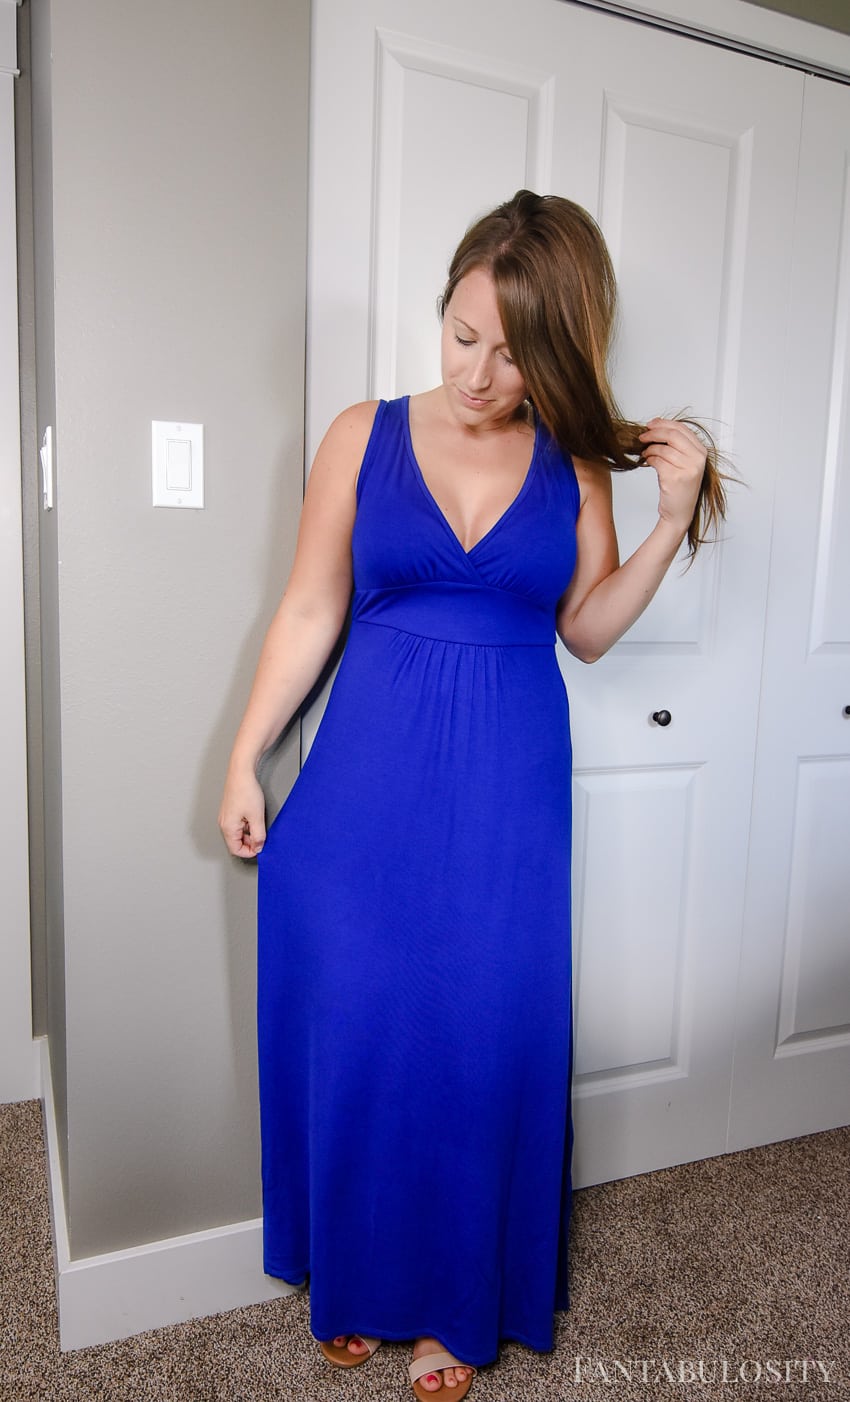 Blue maxi dress from Nordstrom - Trunk Club Try On Video and Photos